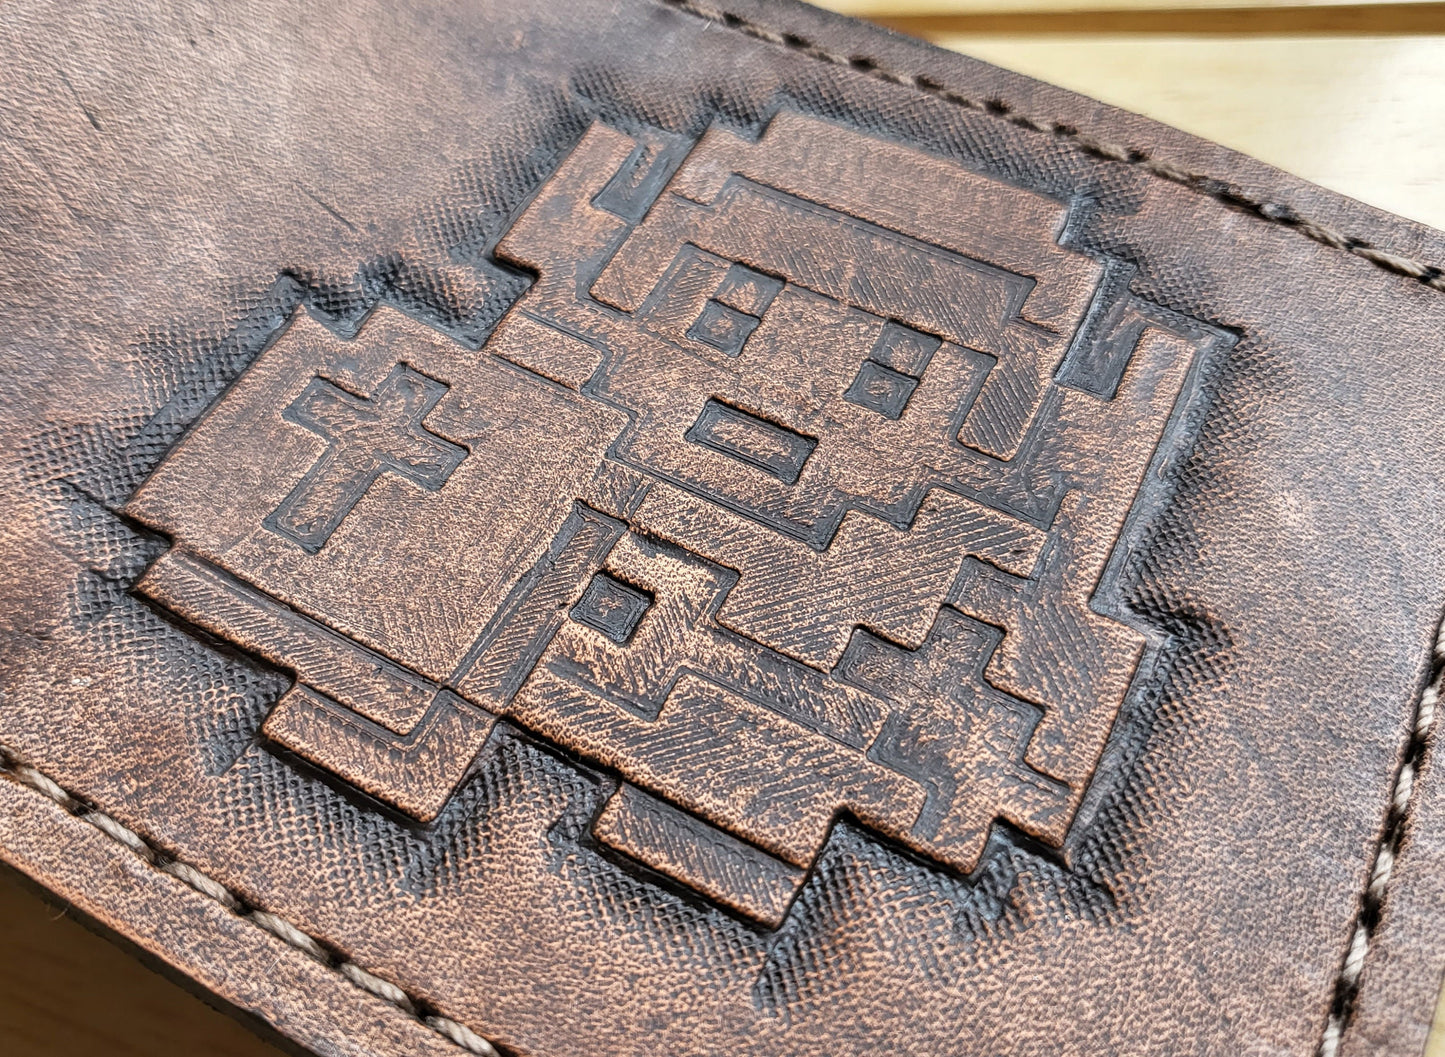 Pixel Link and Heart containers- leather wallet - Leather Bifold Wallet - Handcrafted Legend of Zelda Wallet - Link Wallet